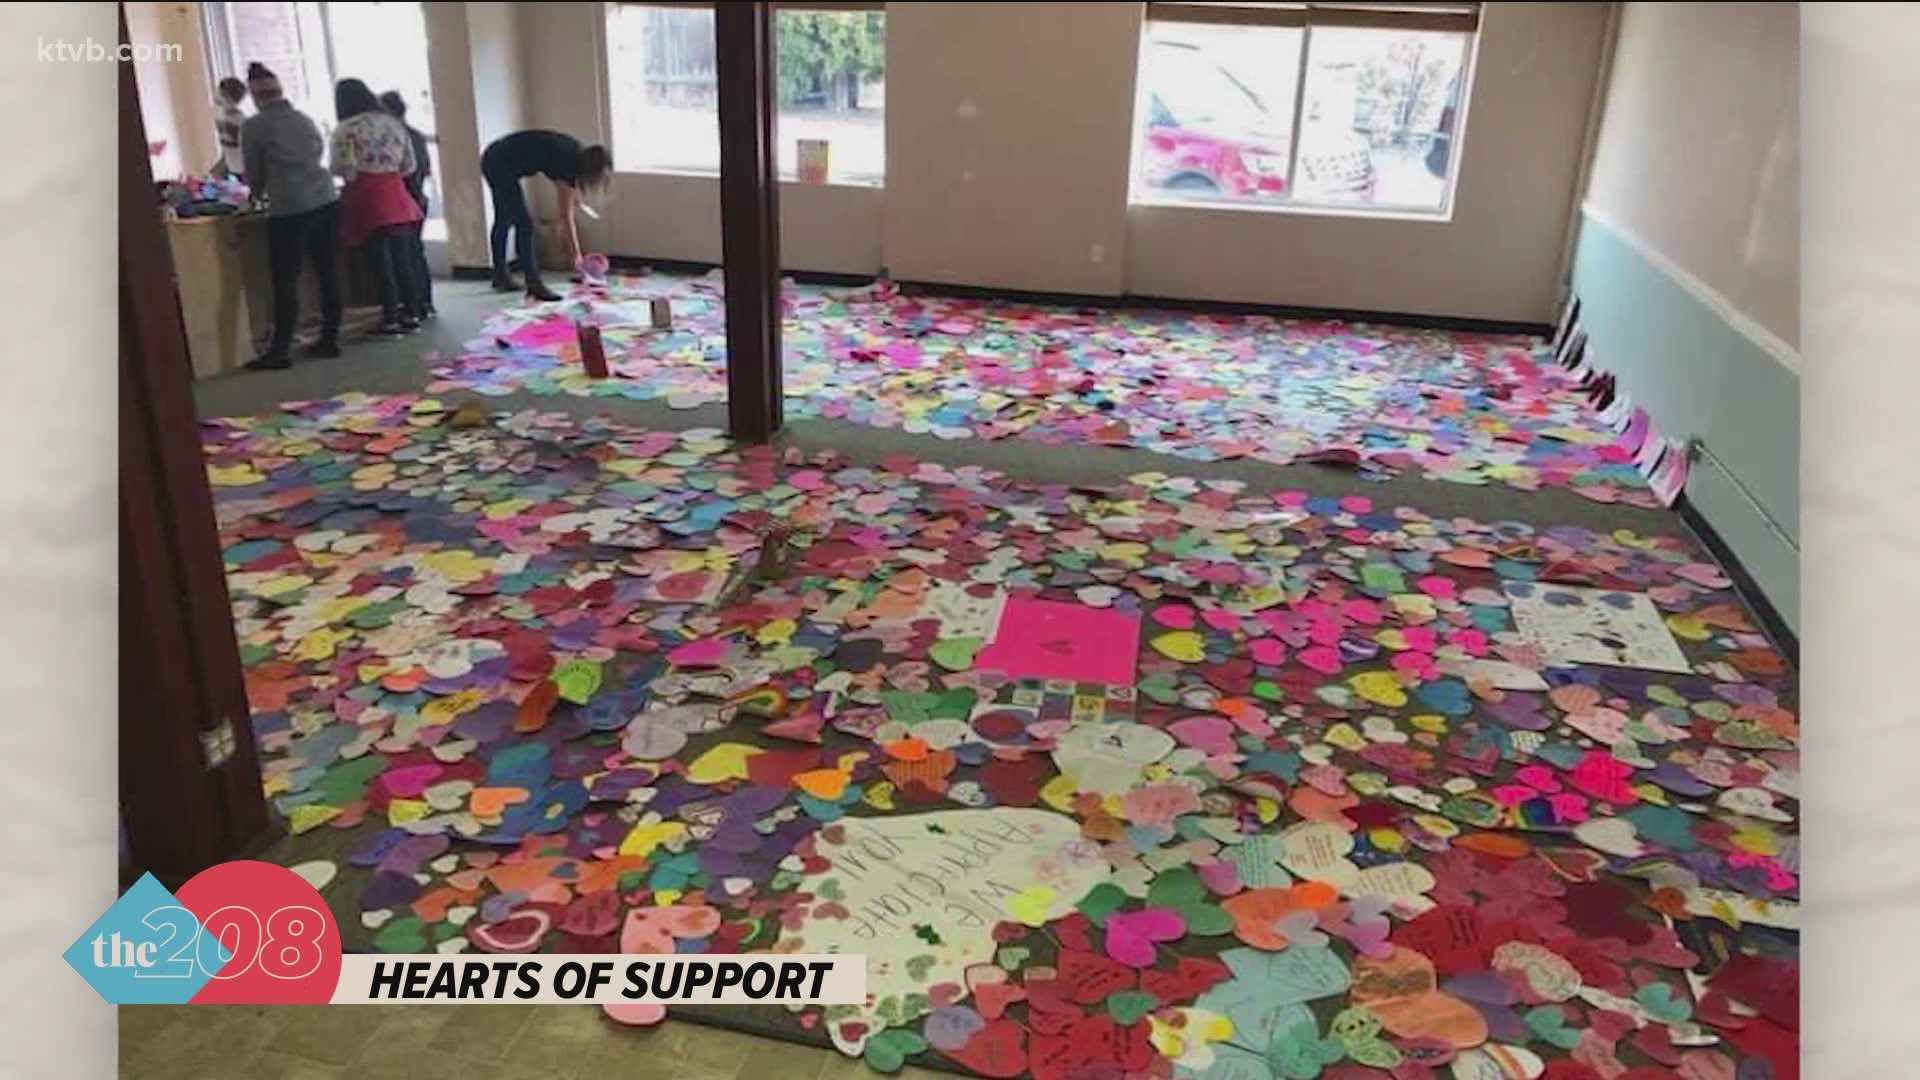 The hundreds of hearts of support showed Lachiondo and McLean that the community is filled with more love than hate.